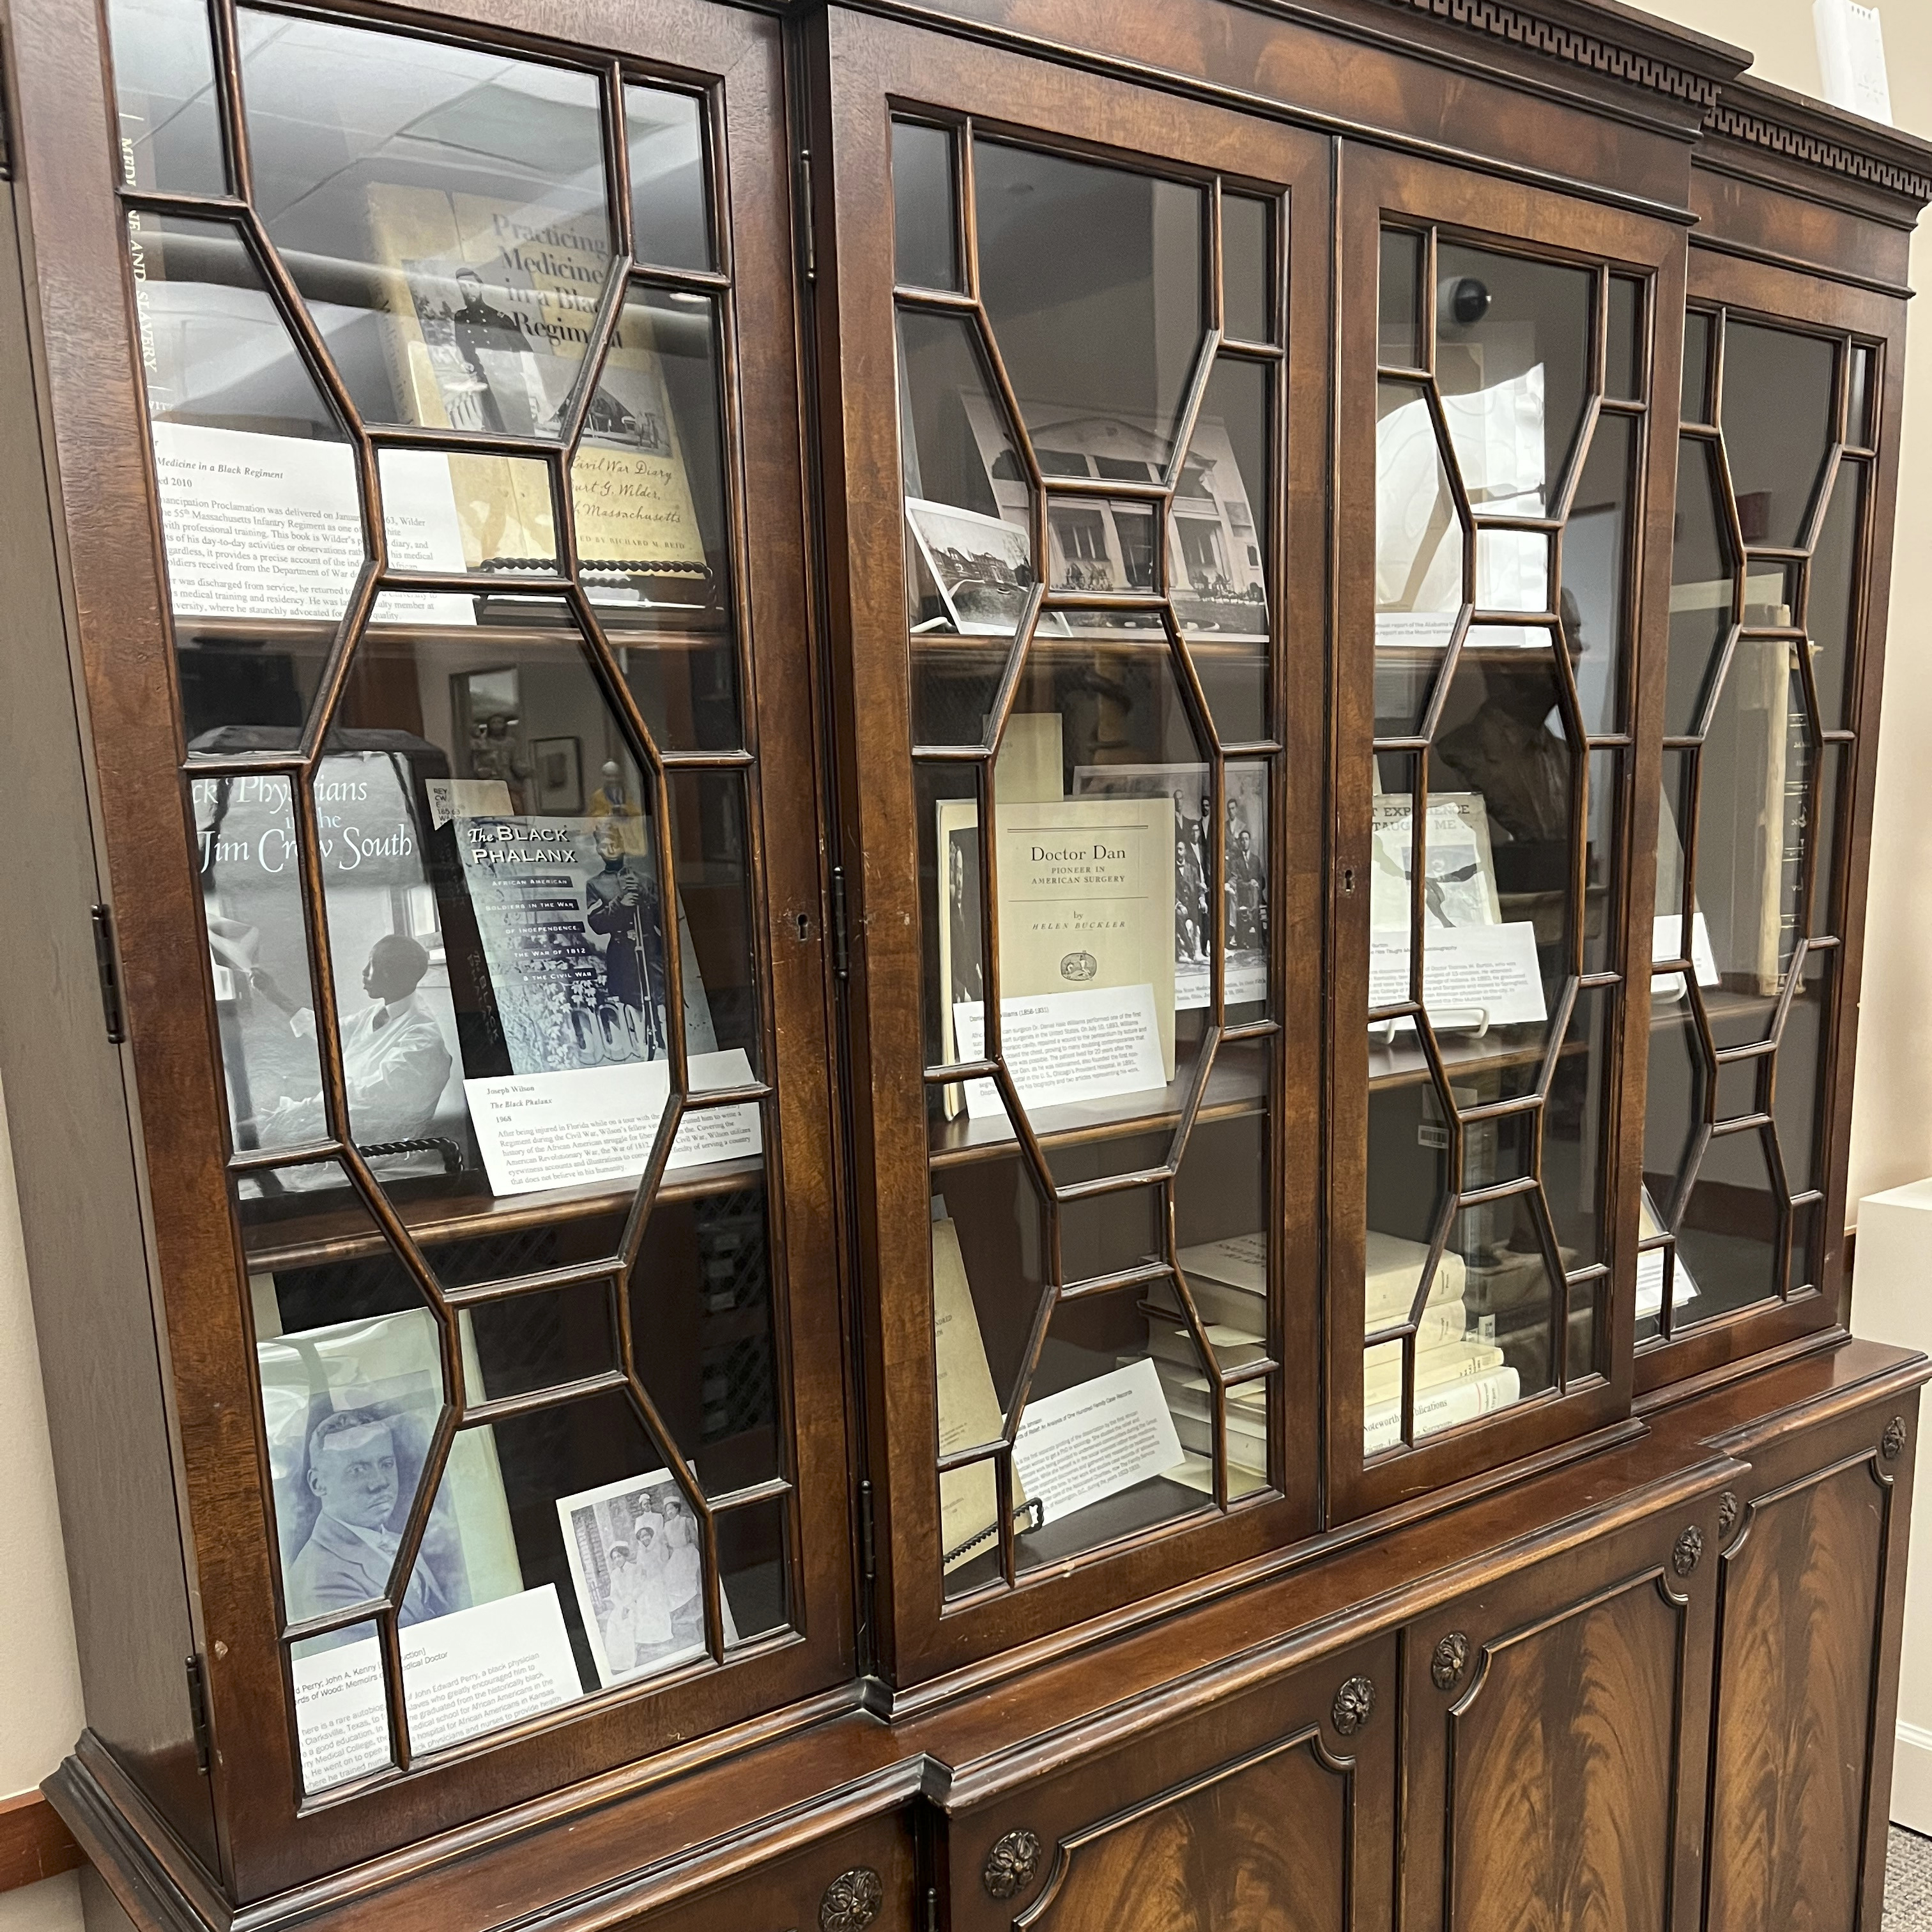 Reynolds-Finley Historical Library Builds the Significant African American Medical Collection